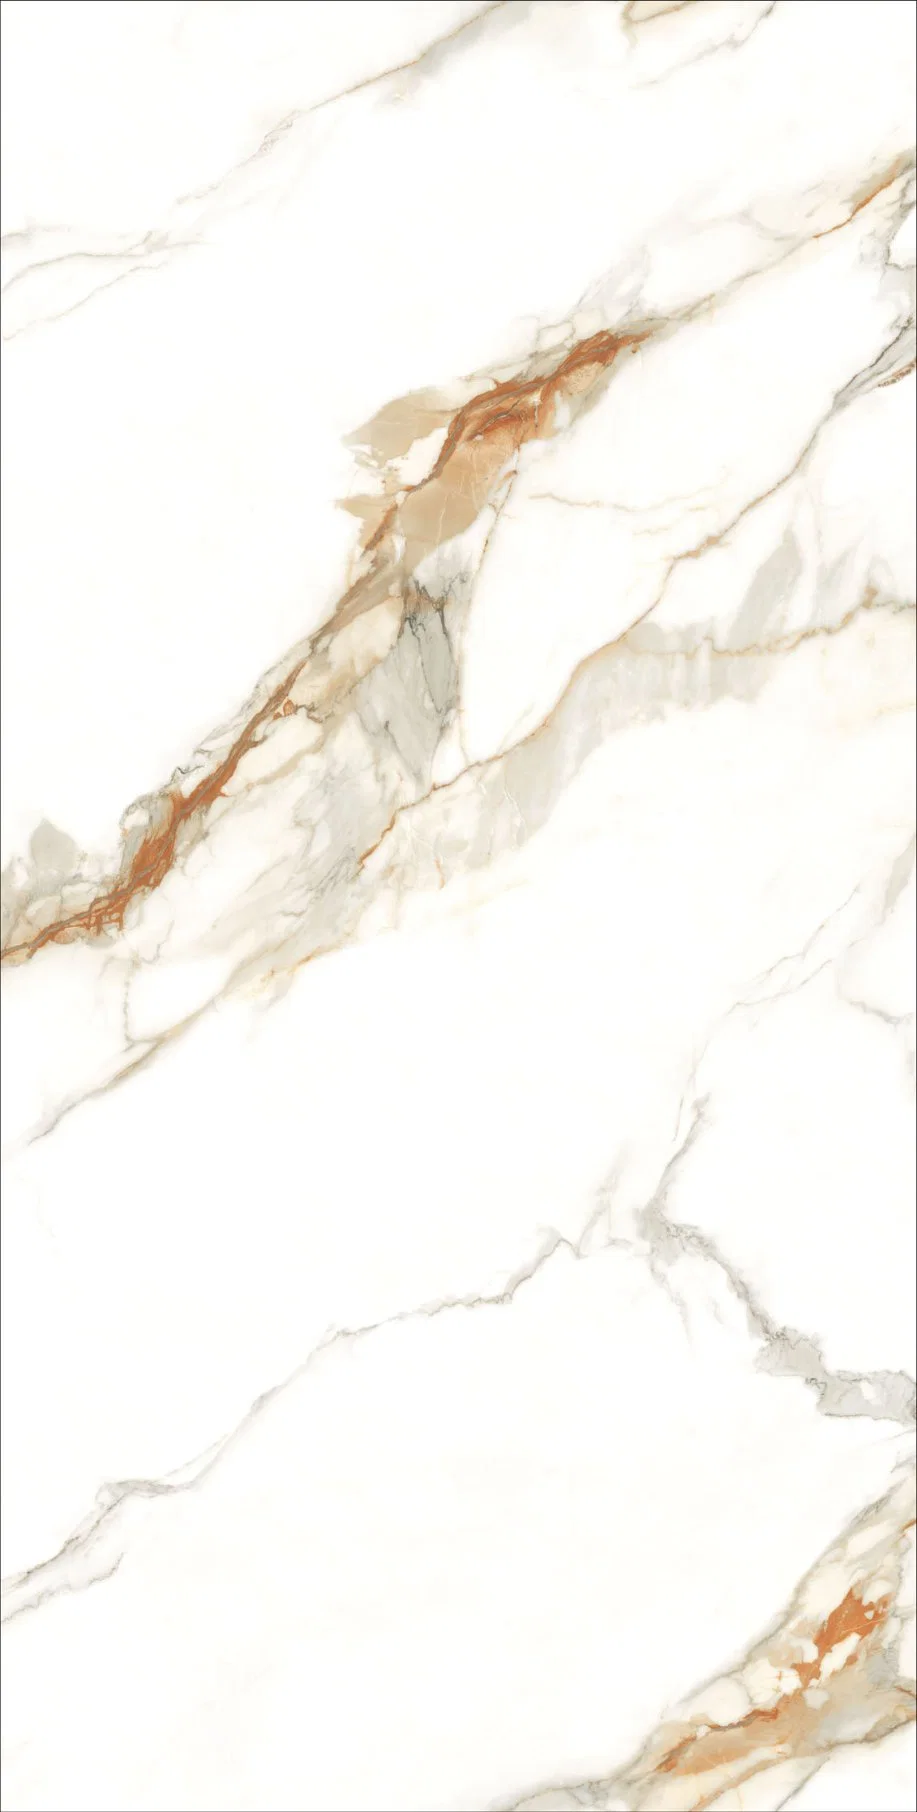 Porcelain Polished Building Materials Pure Ceramic Floor Sintered Stone Marble Tiles Price Ceramic Wall Tile Bathroom Marble Mosaic Slate